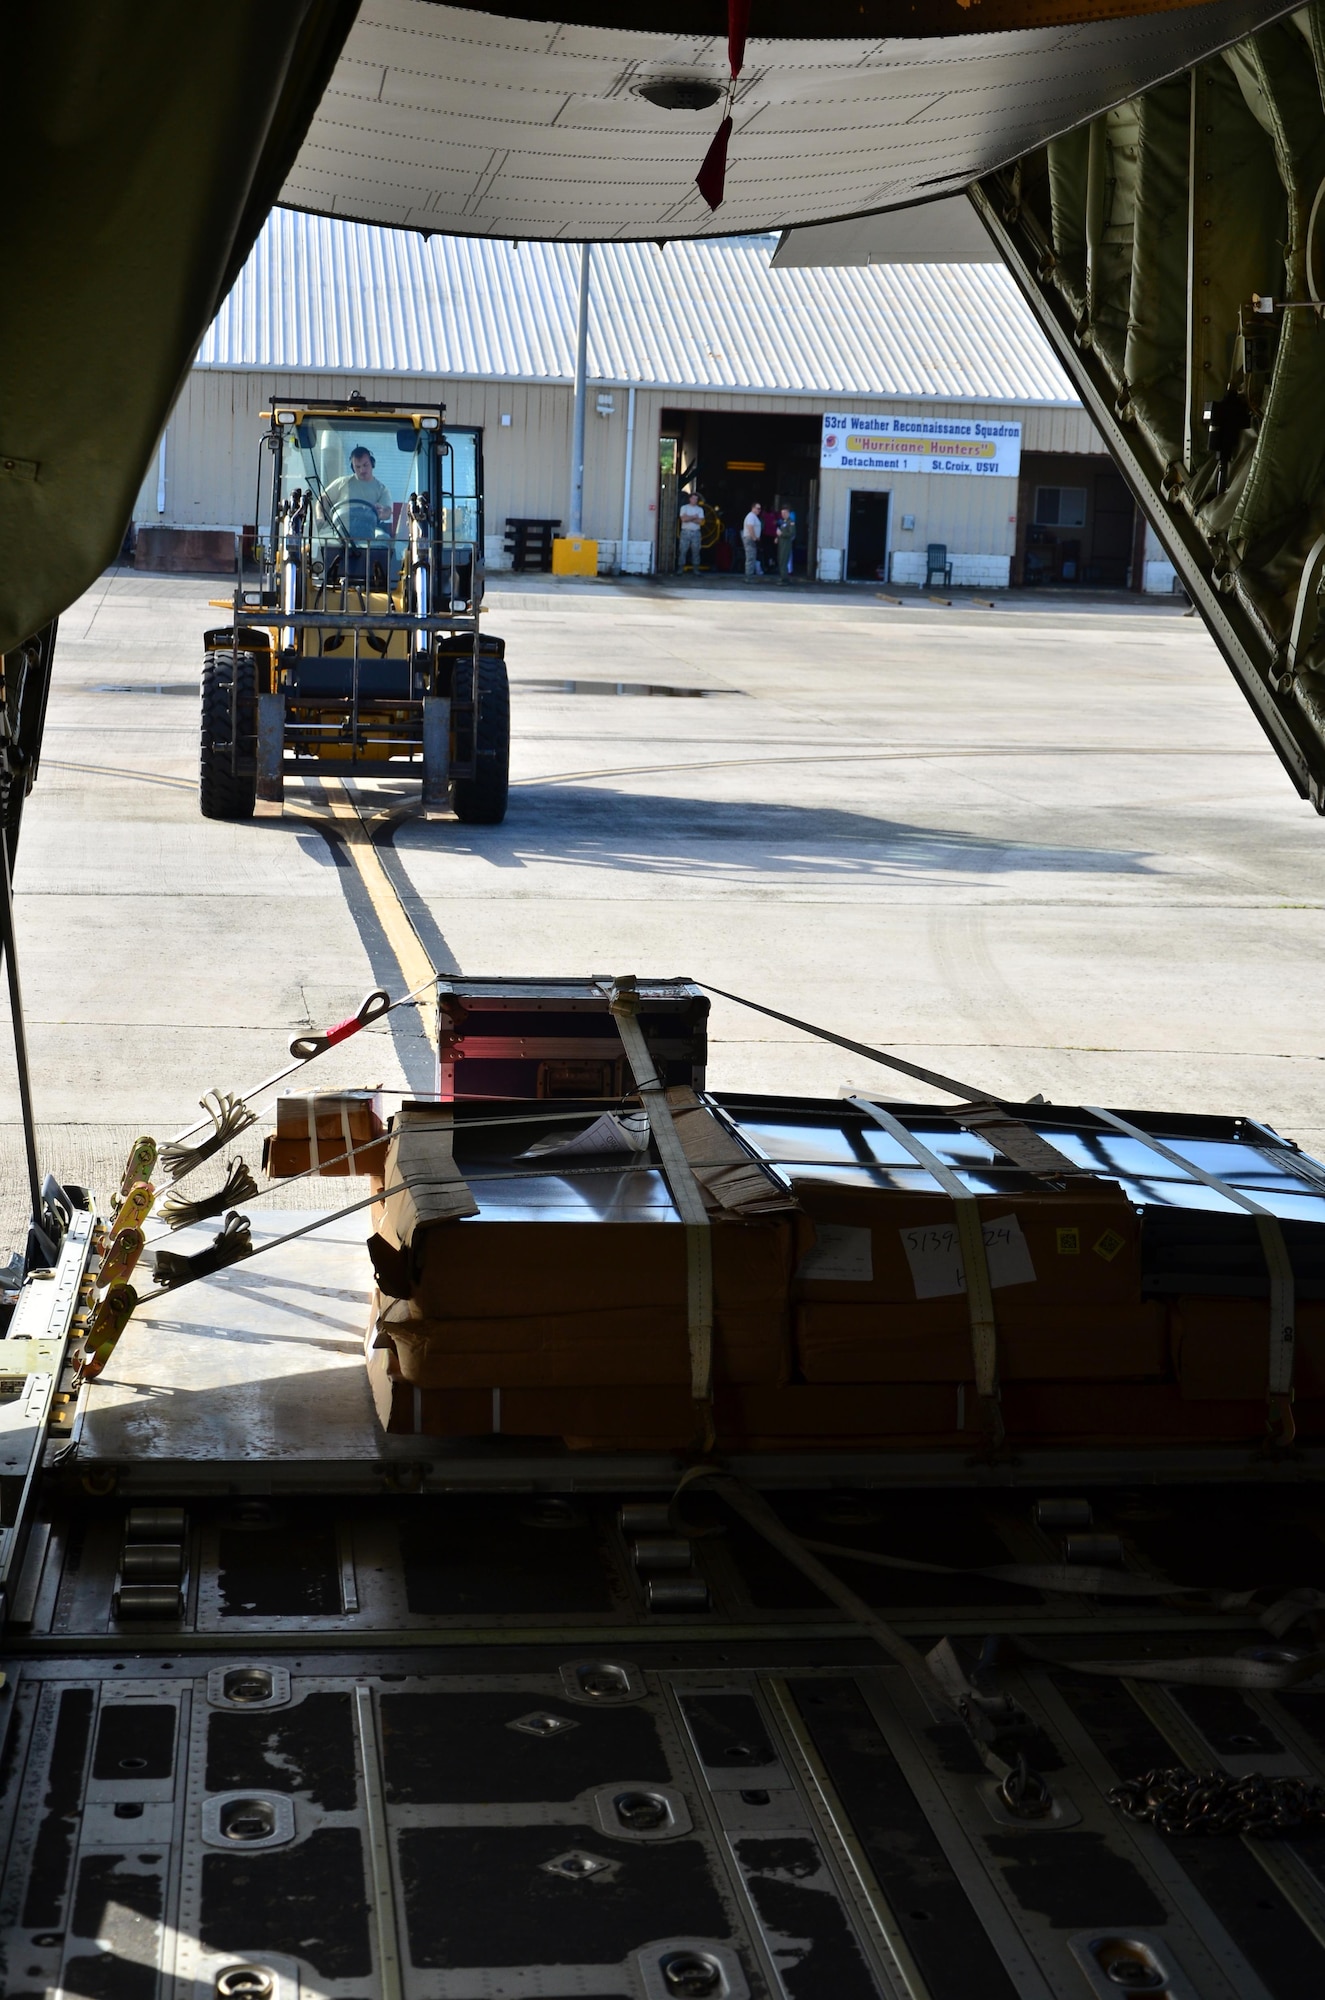 Senior Airman Martin Guthrie, a reservist with the 403rd Wing, Keesler Air Force Base, Miss., uses a forklift to unload a pallet from a WC-130J at the Henry E. Rohlsen Airport, St. Croix, U.S. Virgin Islands, Dec. 12, 2013 during Roll Up. This mission officially closes the 2013 Atlantic Hurricane Hunting operations for the 53rd Weather Reconnaissance Squadron. 